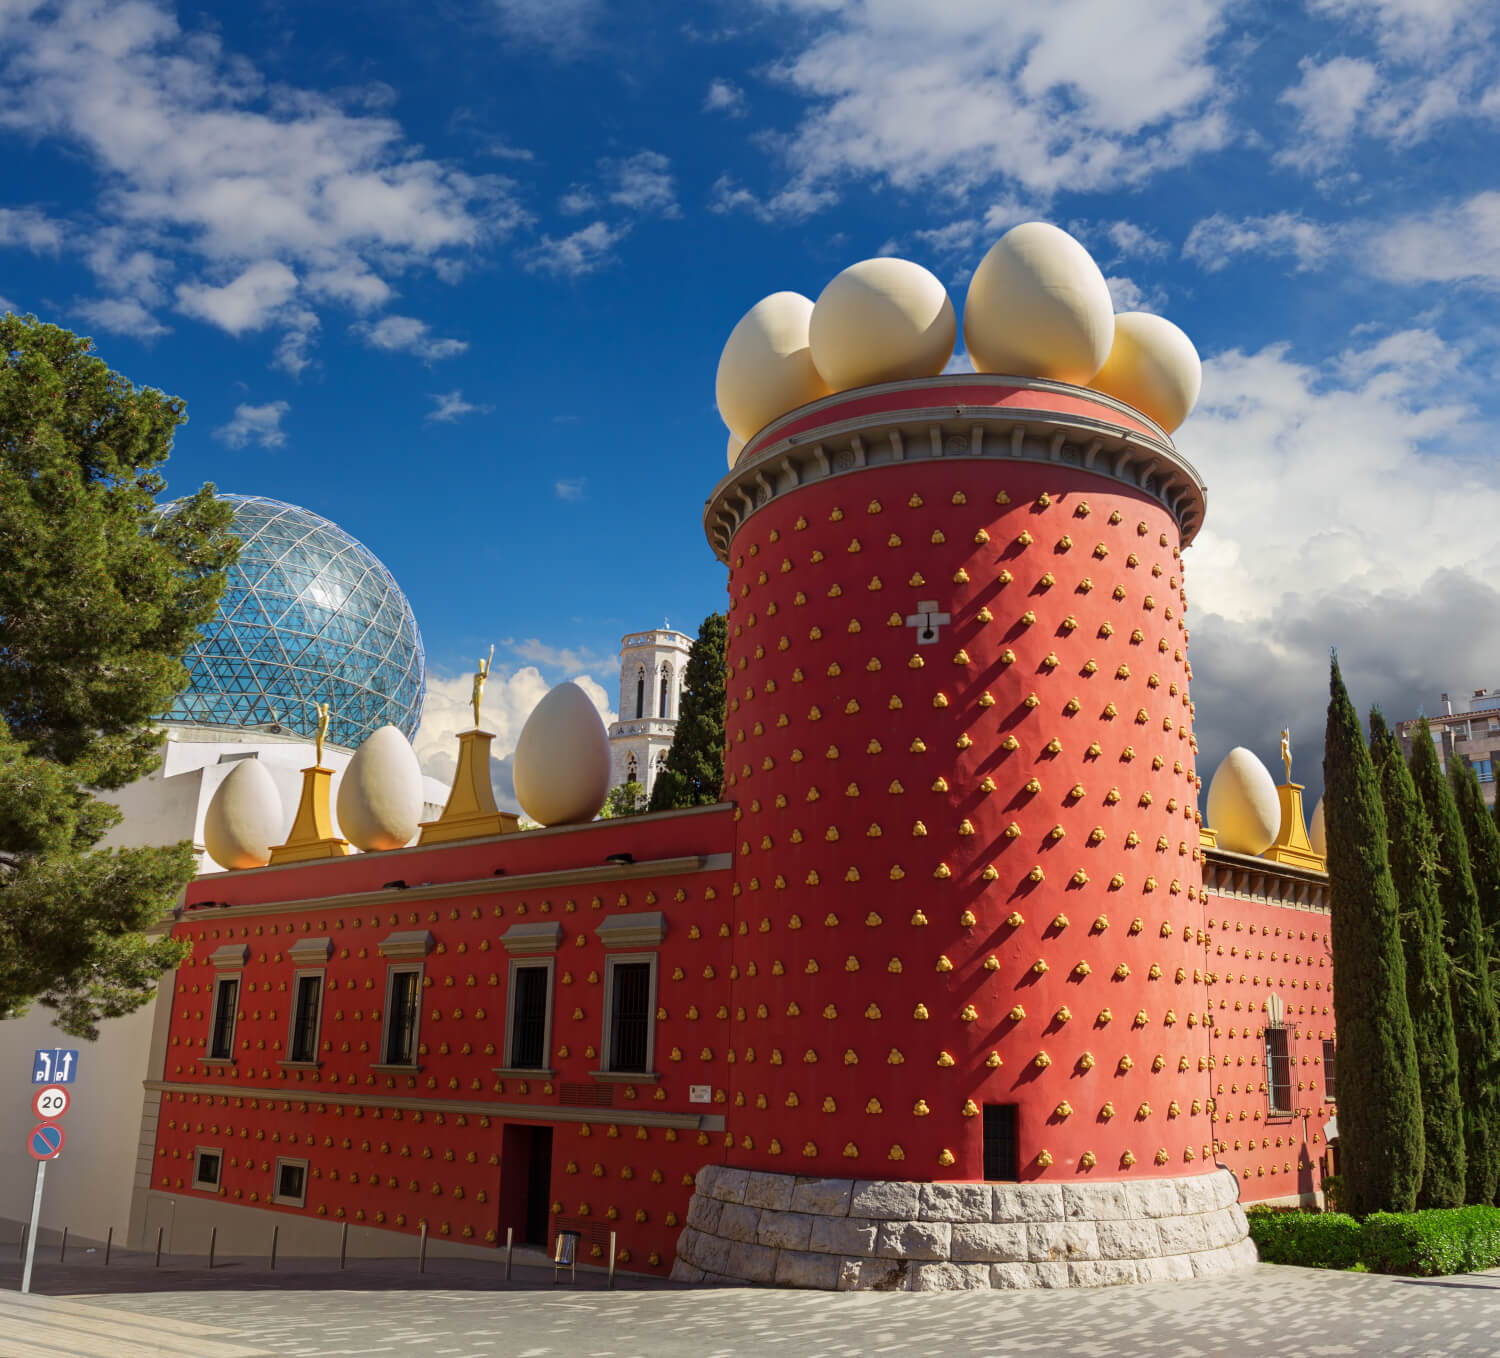 The Dali Theatre-Museum in Figueres